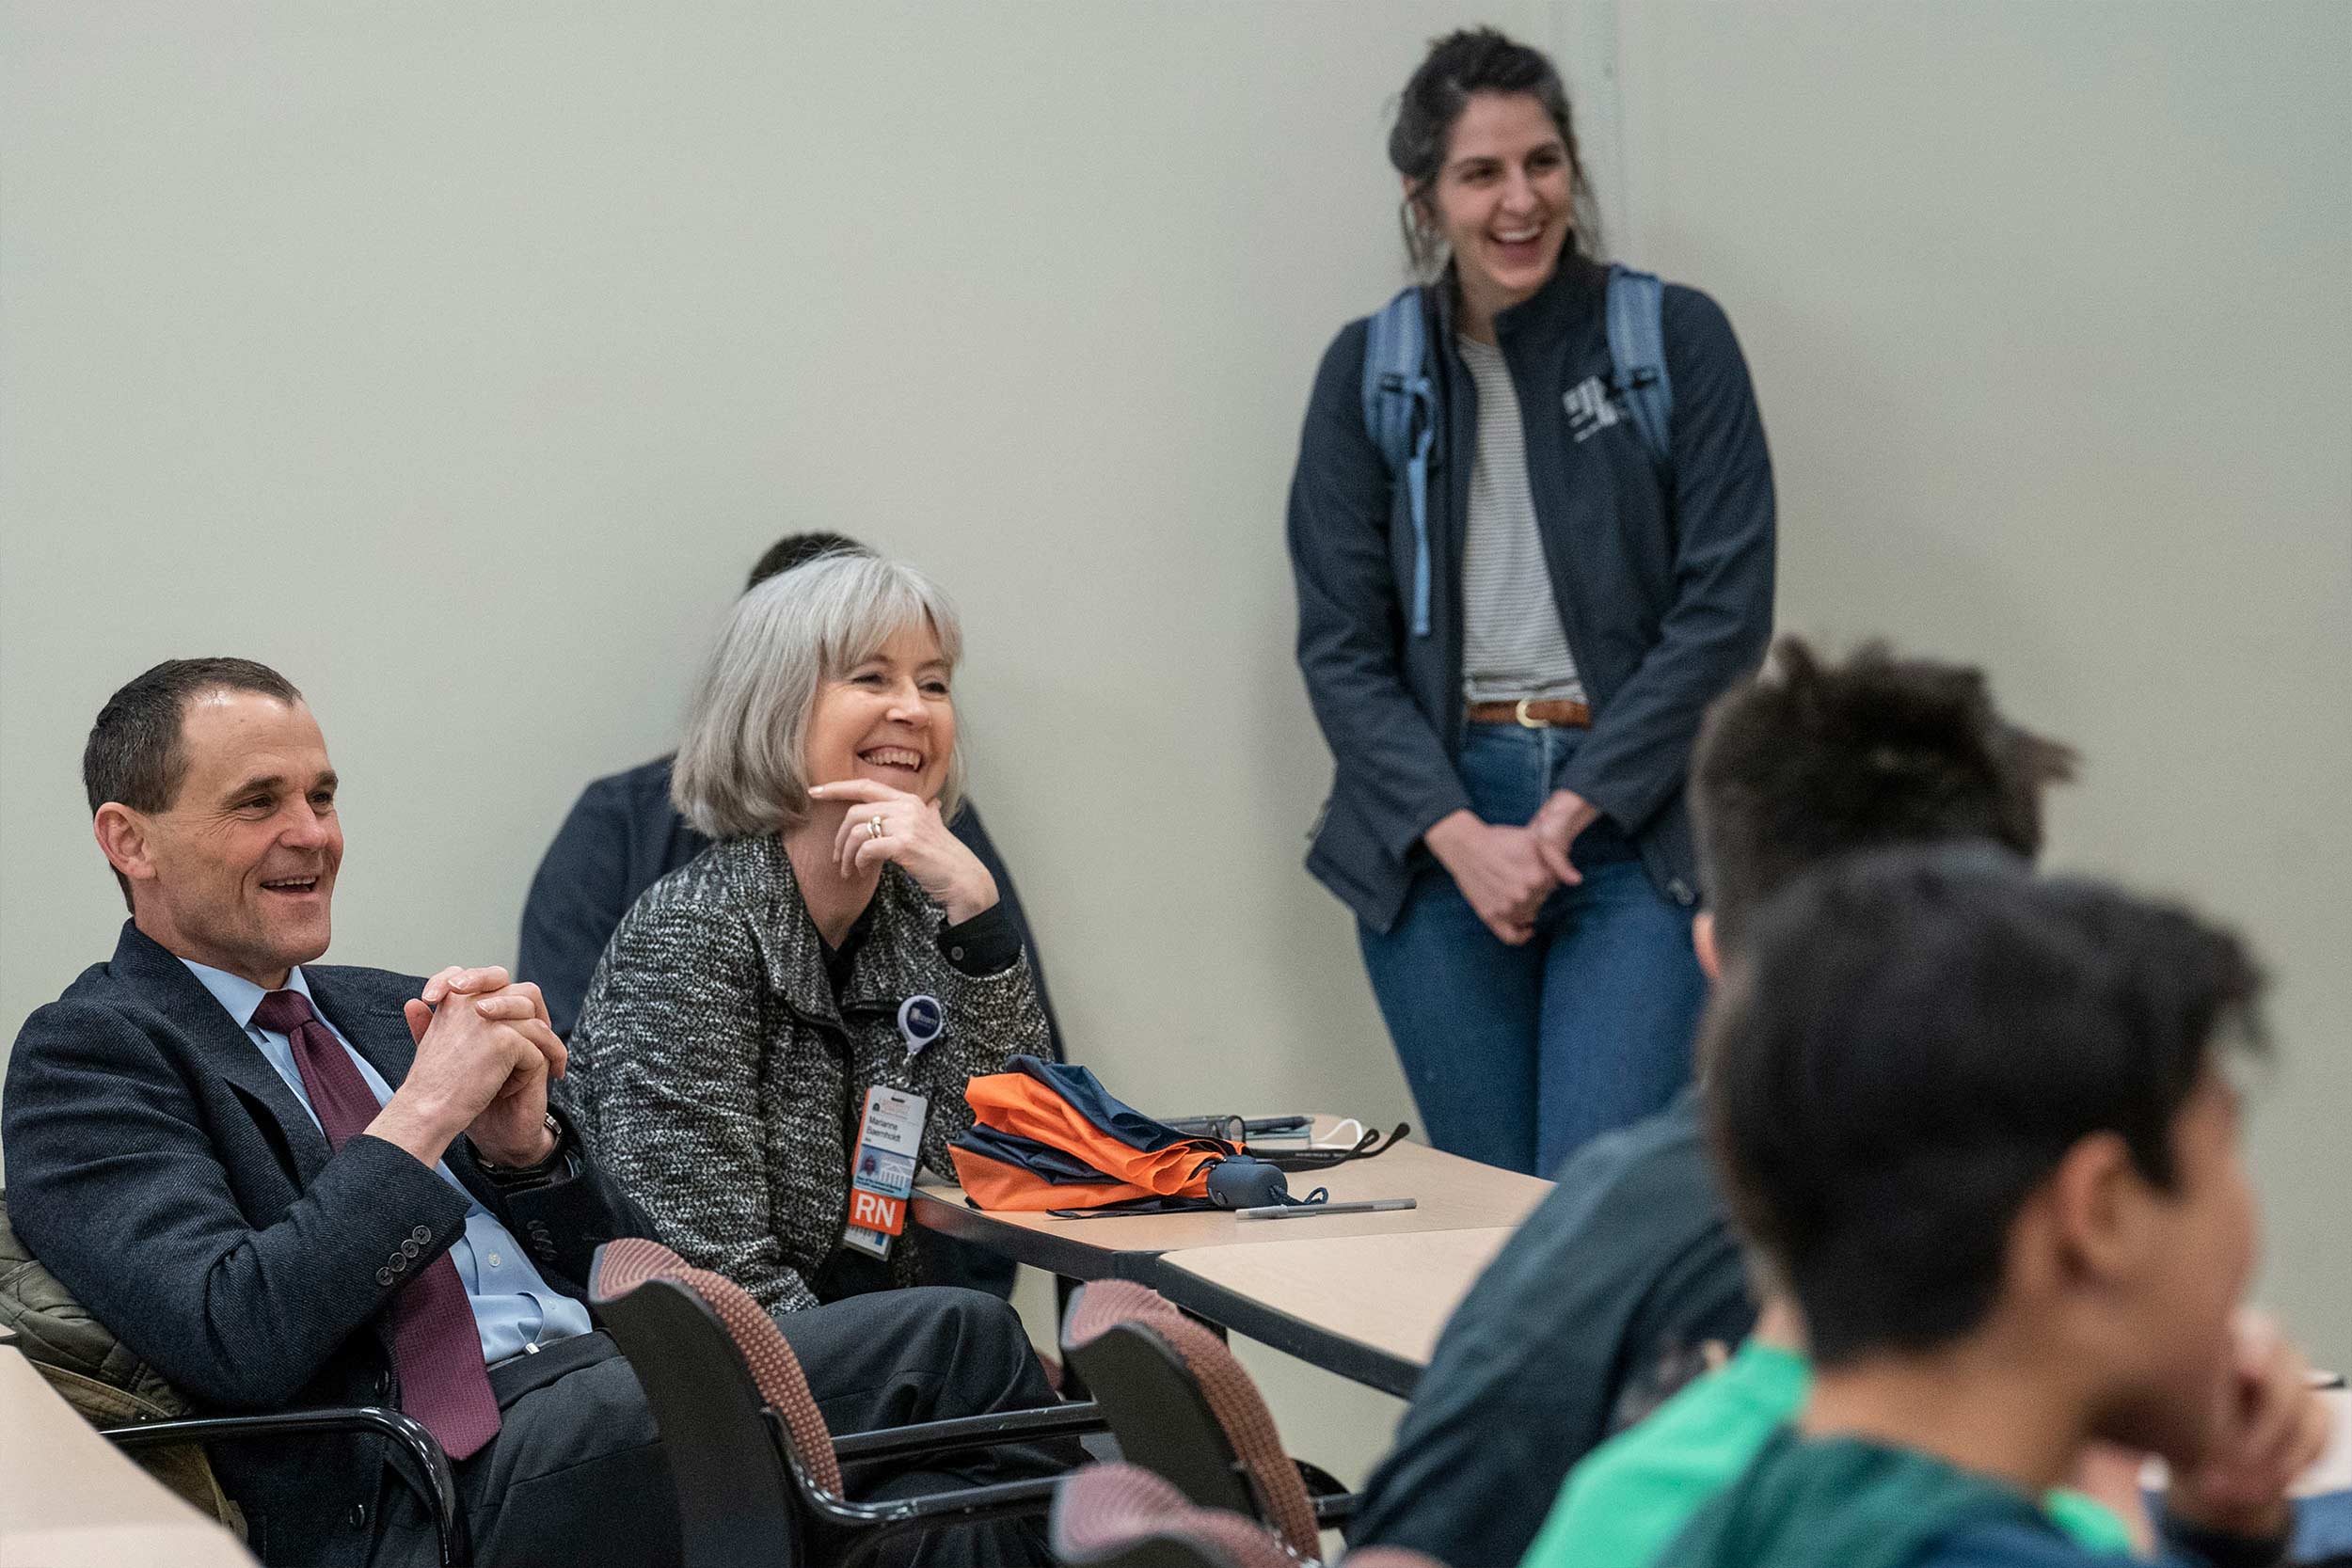 UVA President Jim Ryan and School of Nursing Dean Marianne Baernholdt particpating in the conversation with the nursing and middle school students